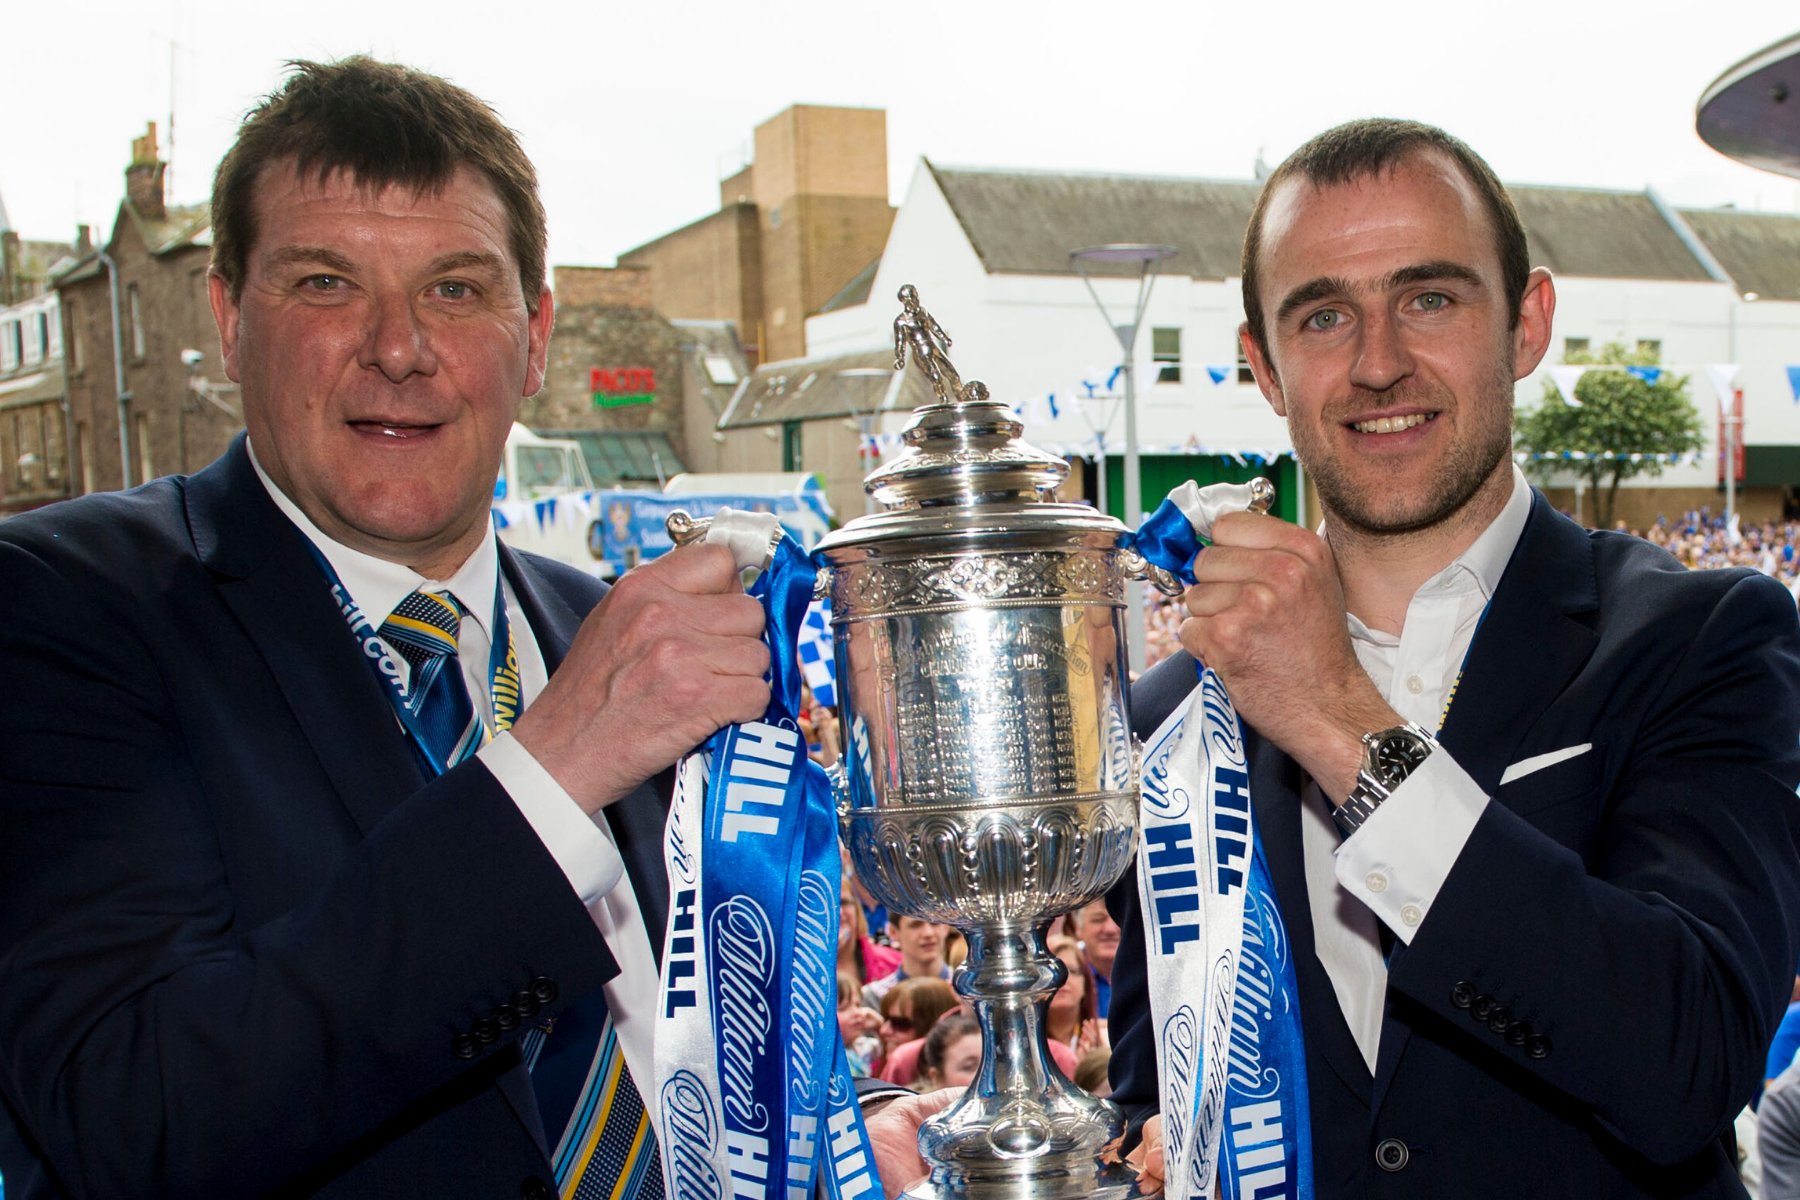 St Johnstone legend Dave Mackay opens up on McDiarmid Park vacancy as he hails Tommy Wright